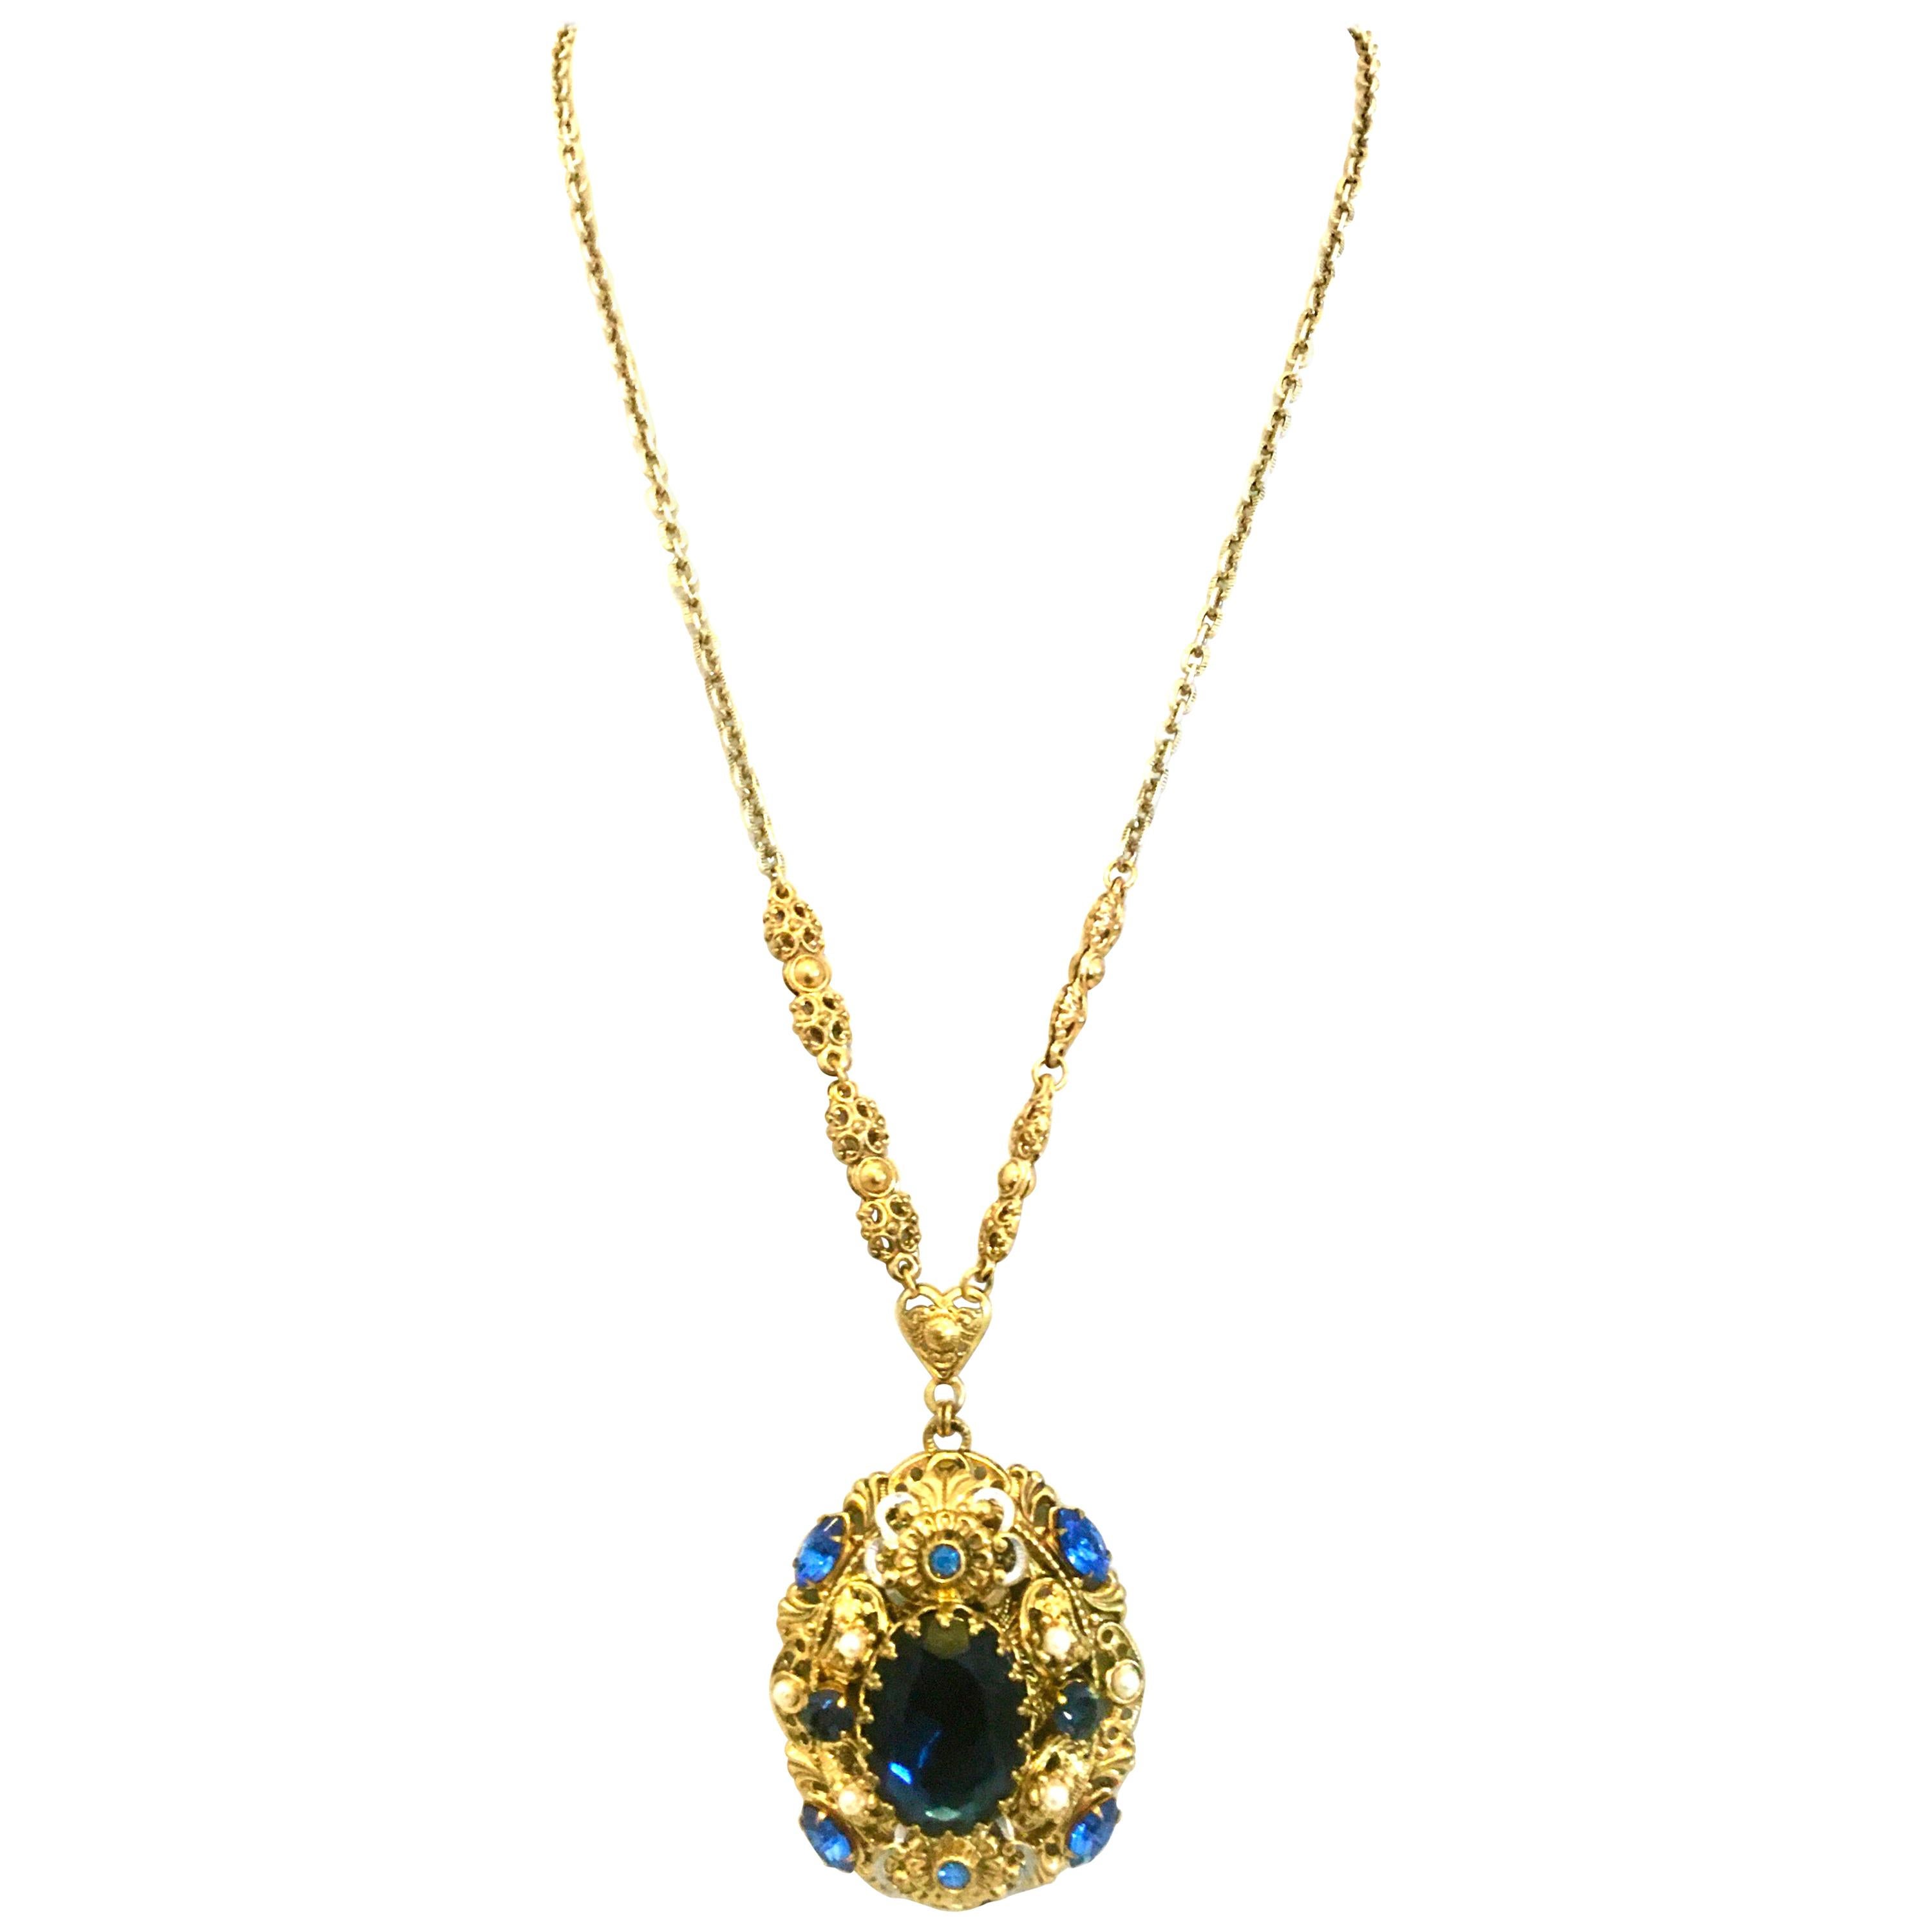 20th Century Gold Plate & Blue Sapphire Crystal Necklace. This European Bohemia 